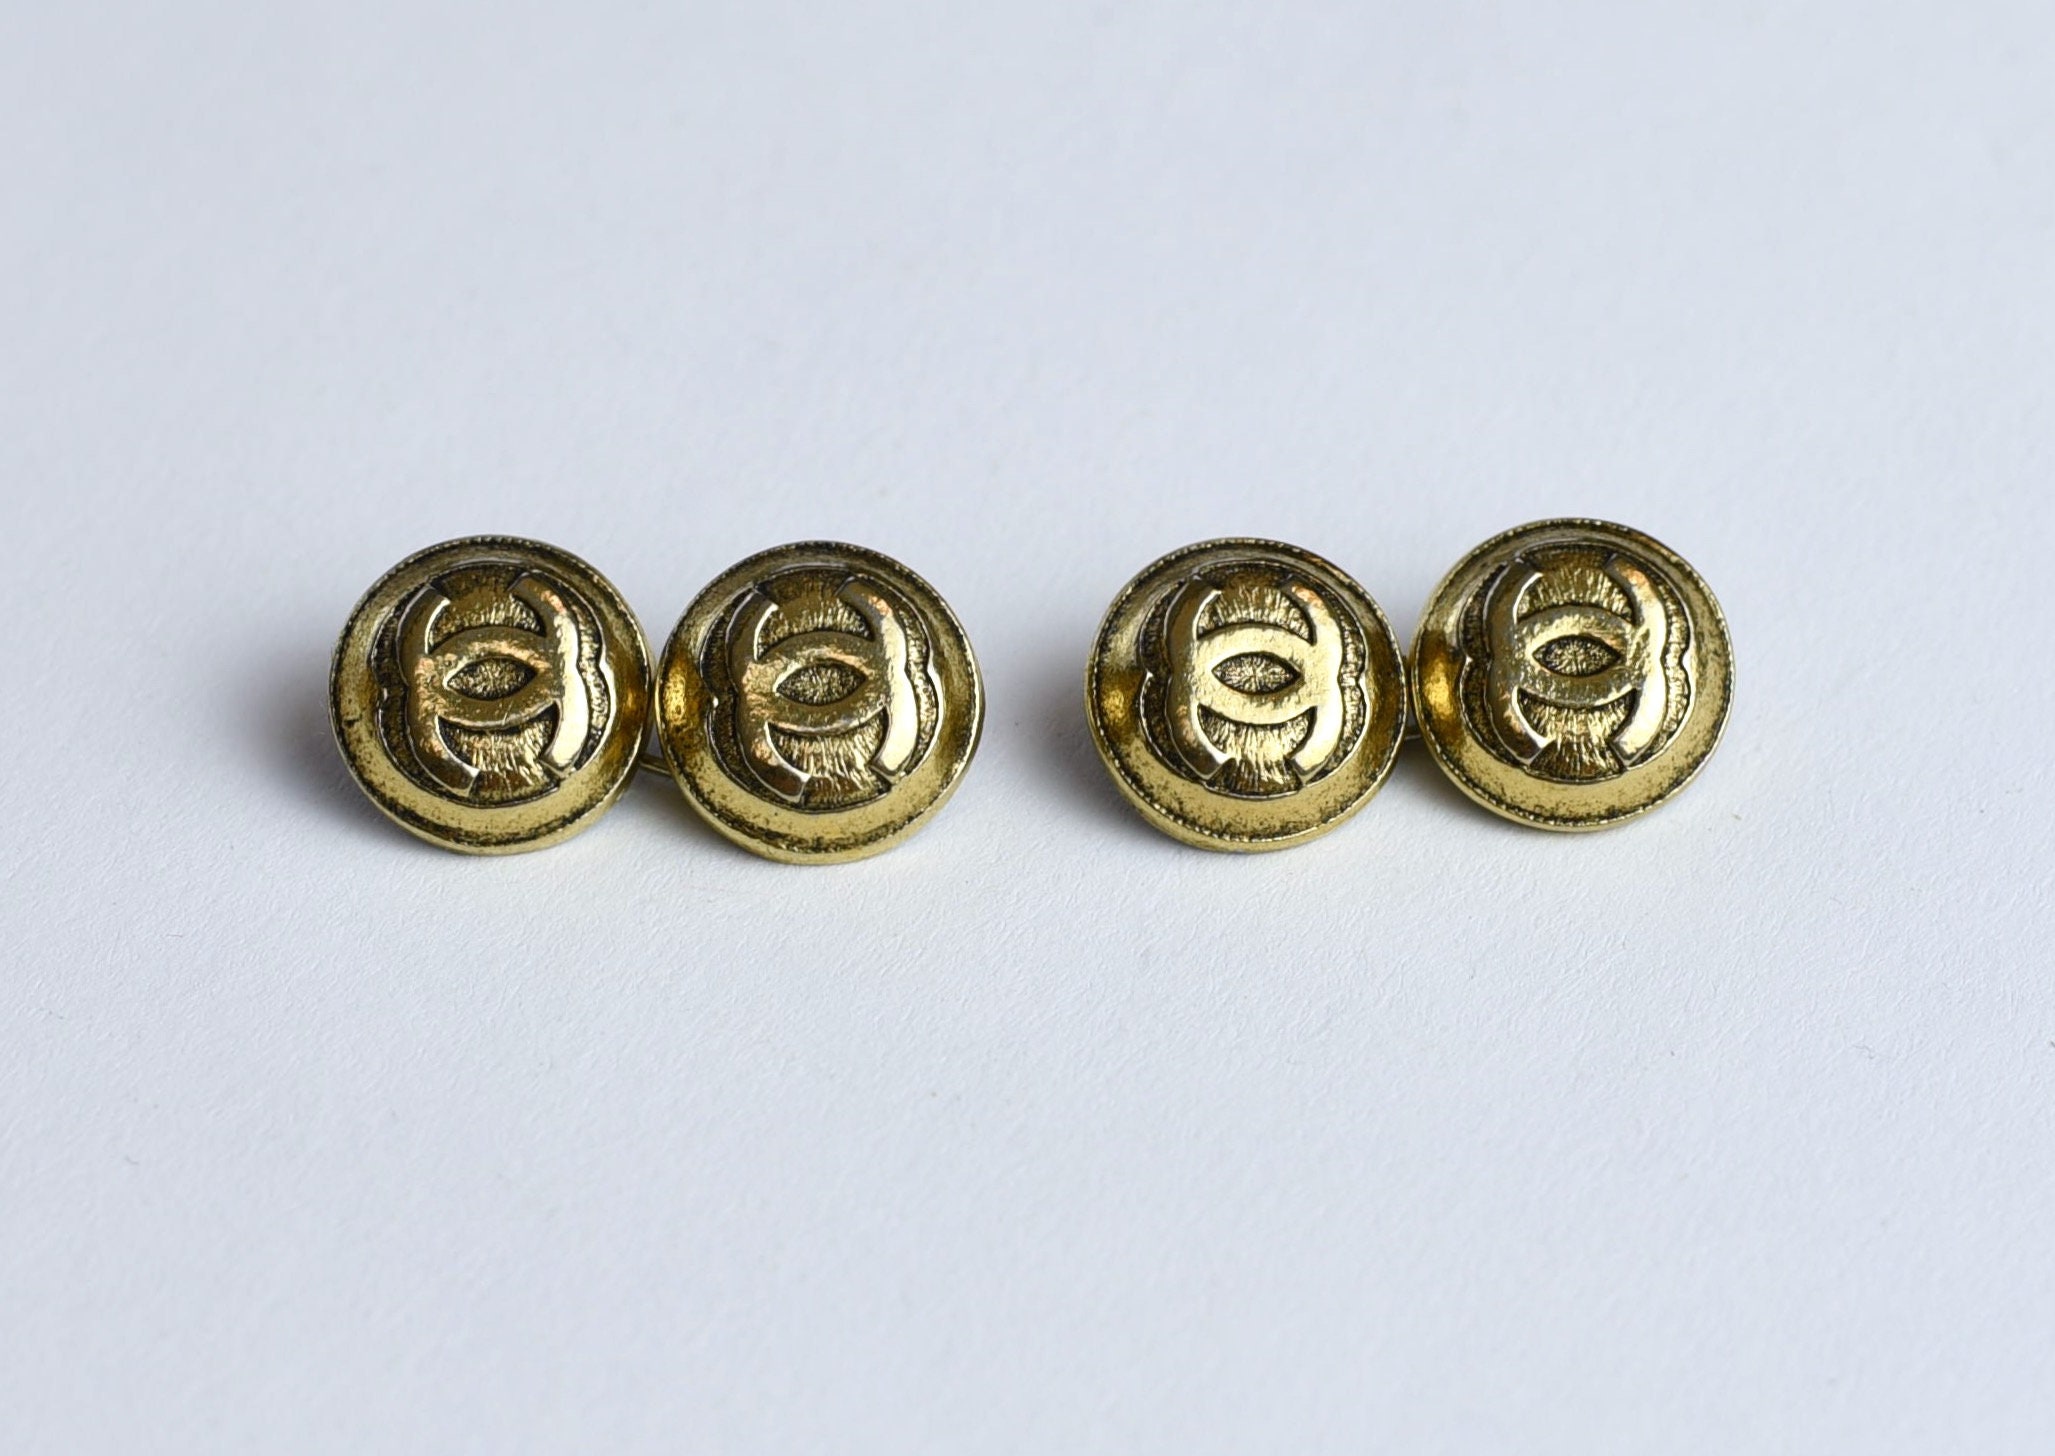 1980s Chanel Cuff Links Signed 